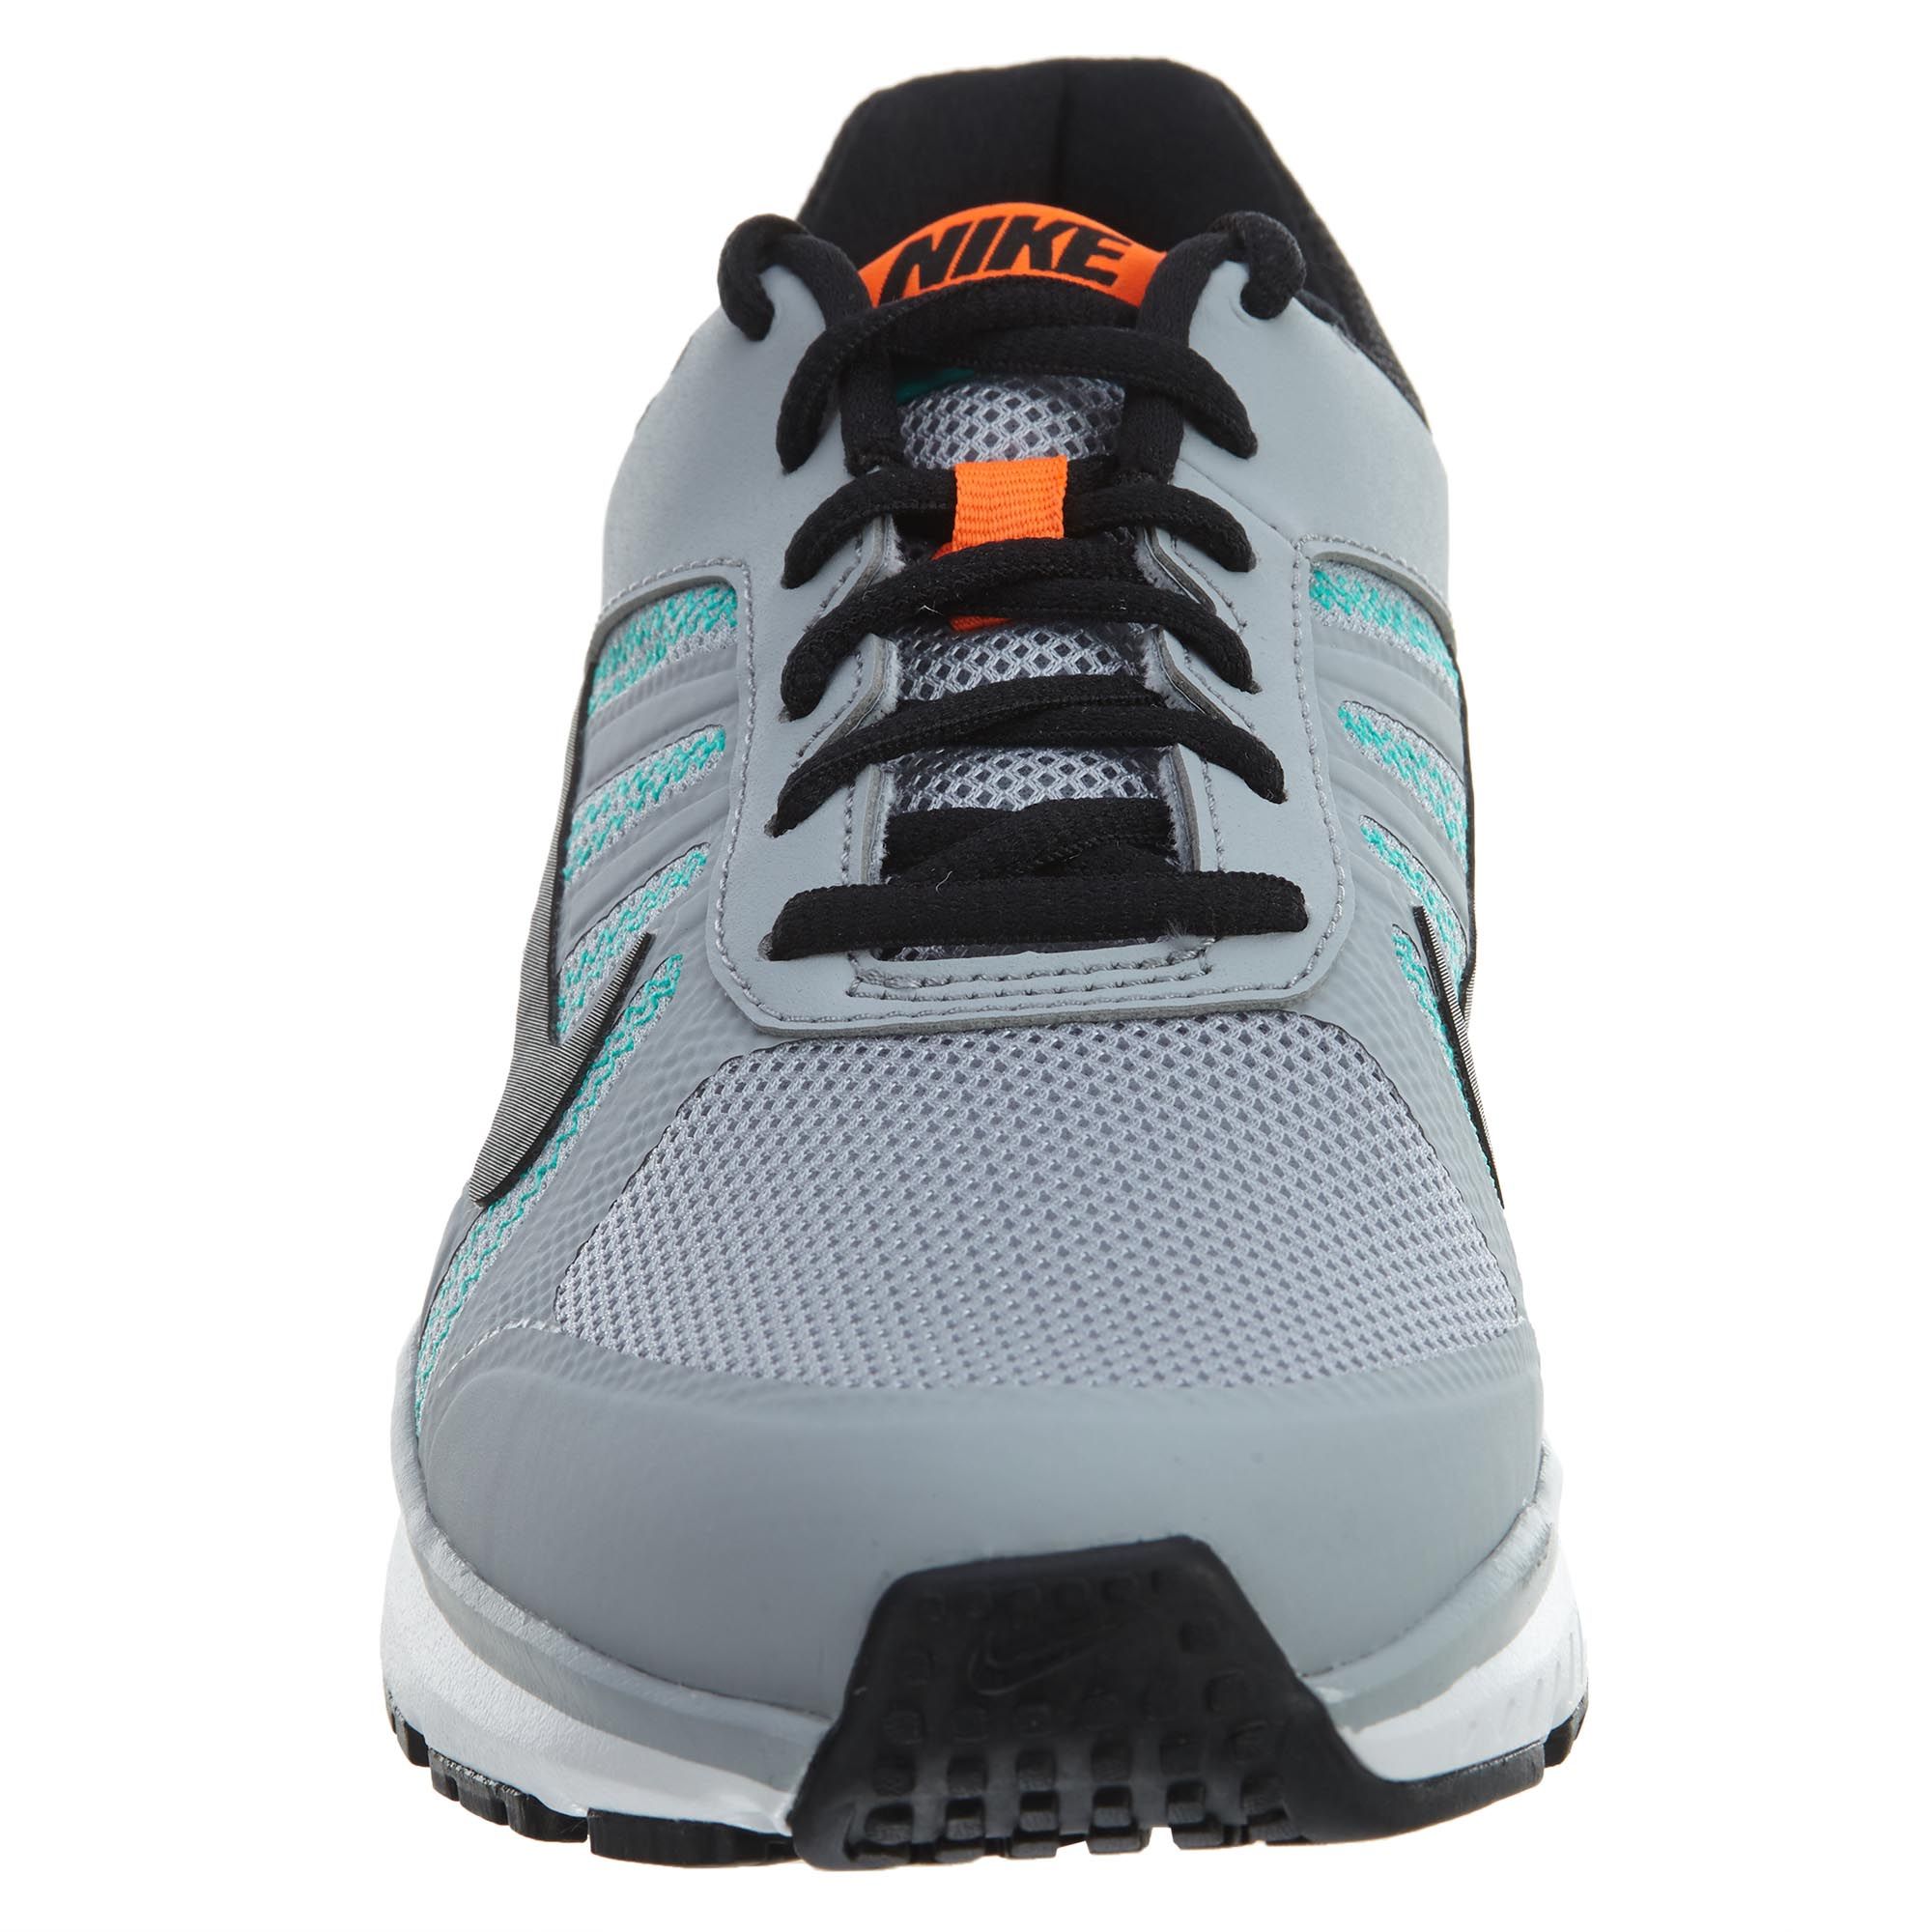 nike dart 12 msl running shoes review